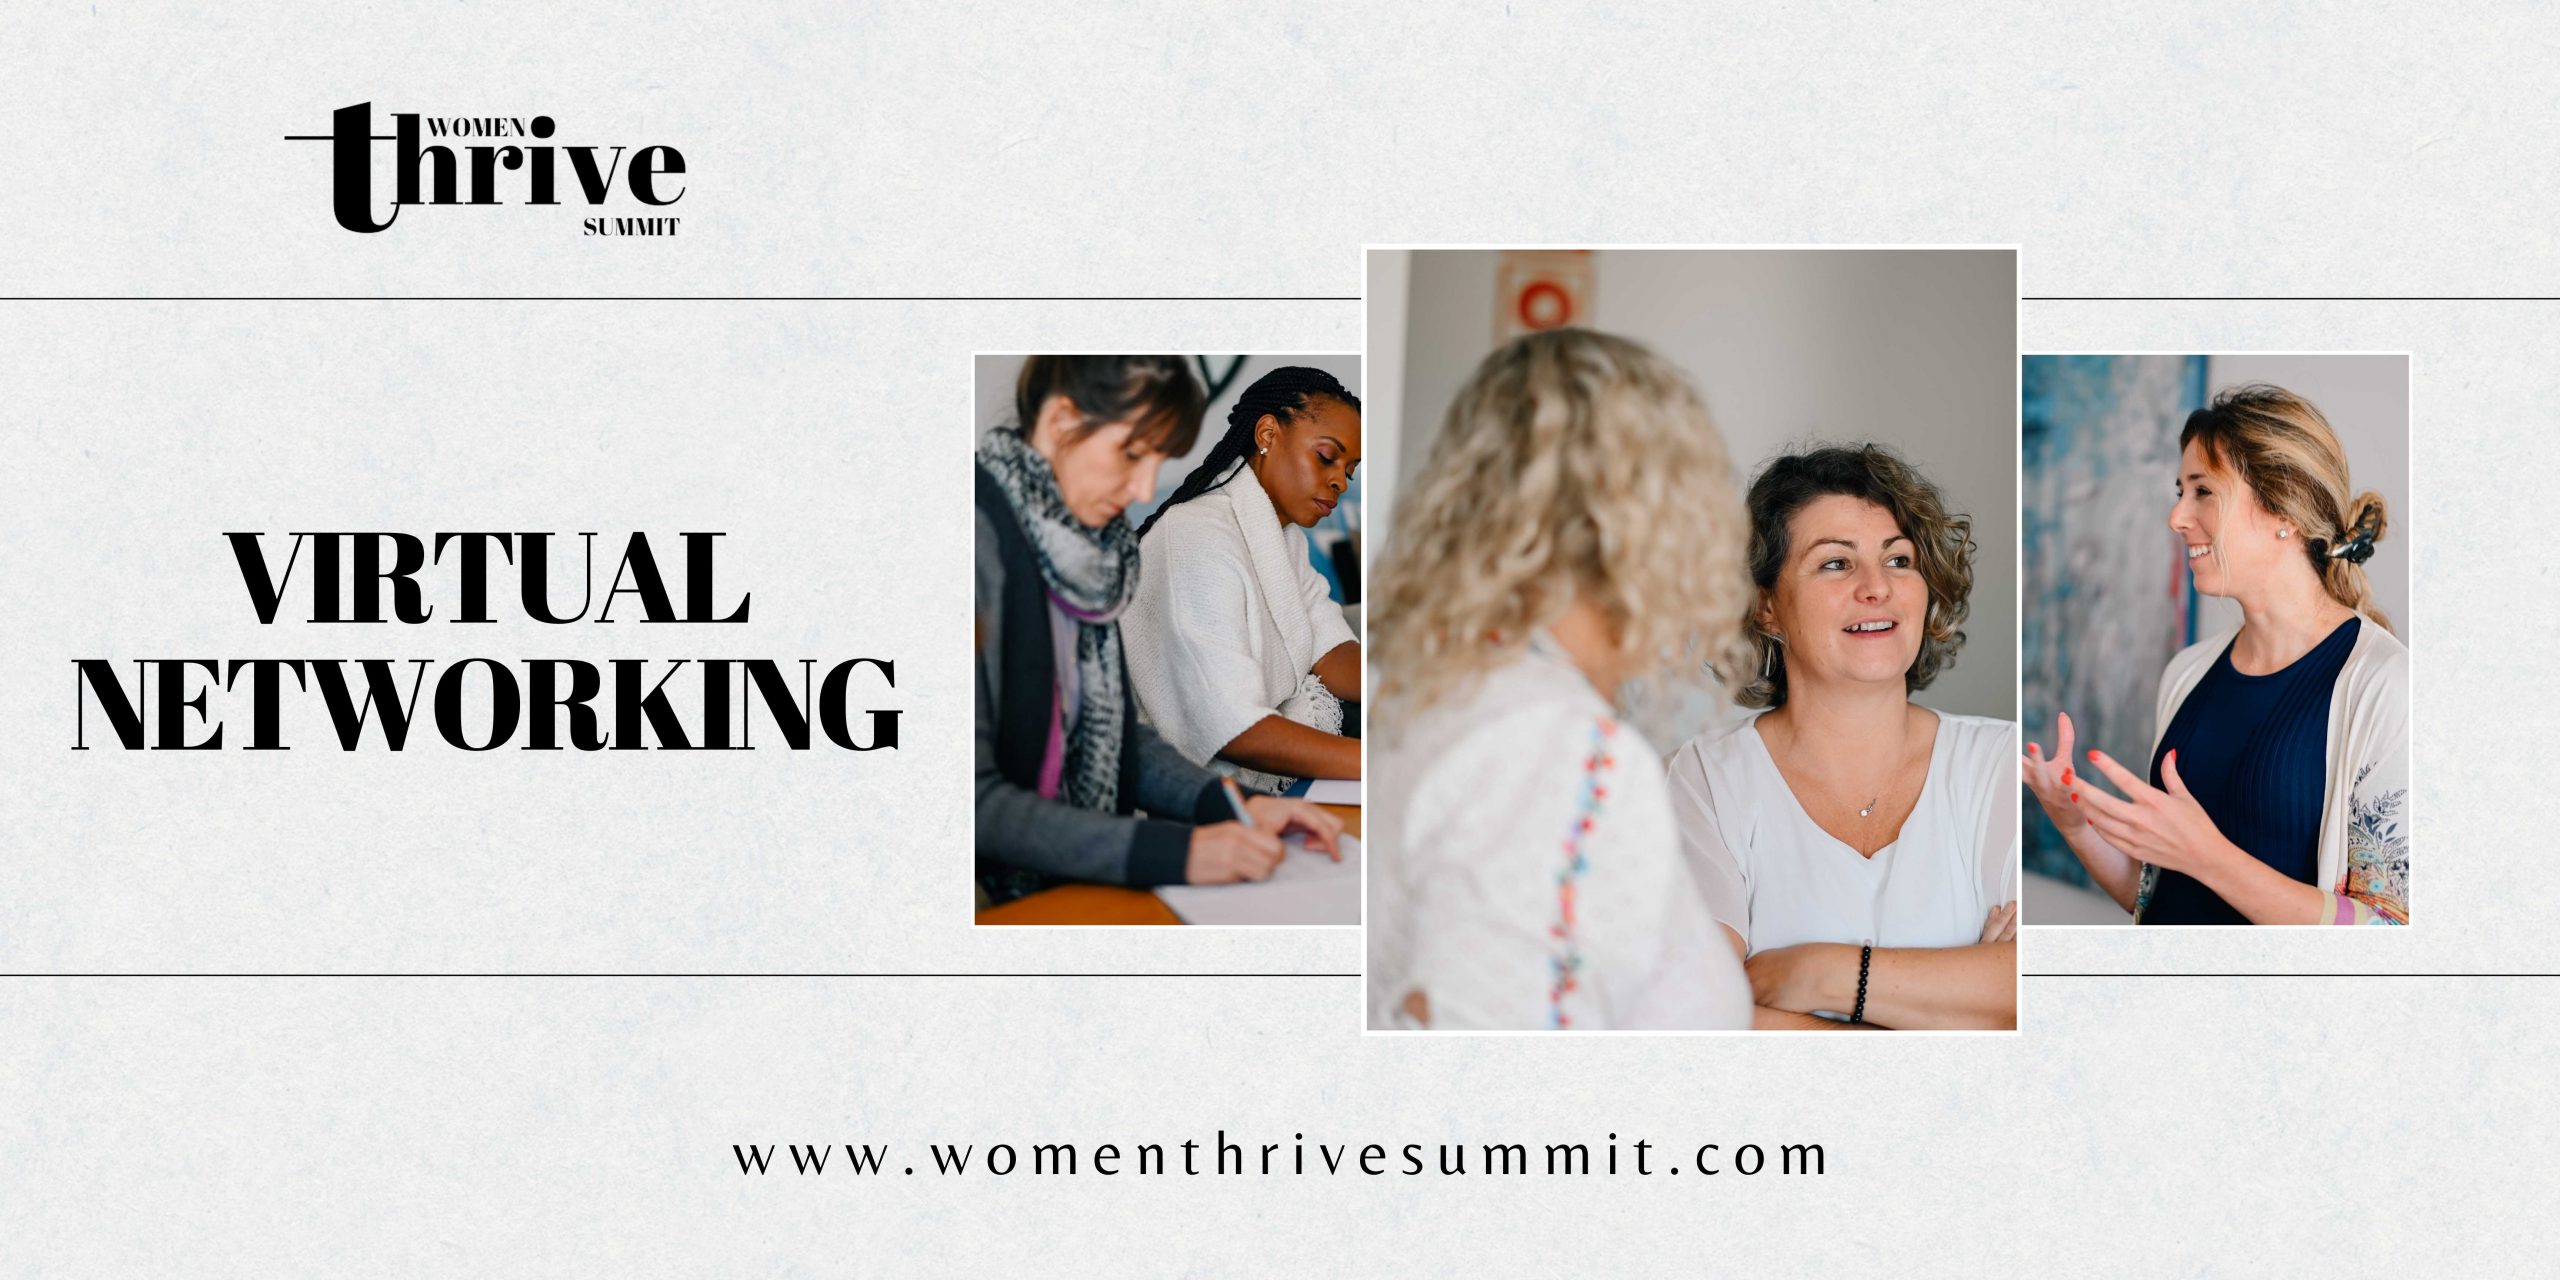 Women Thrive Virtual Networking Events